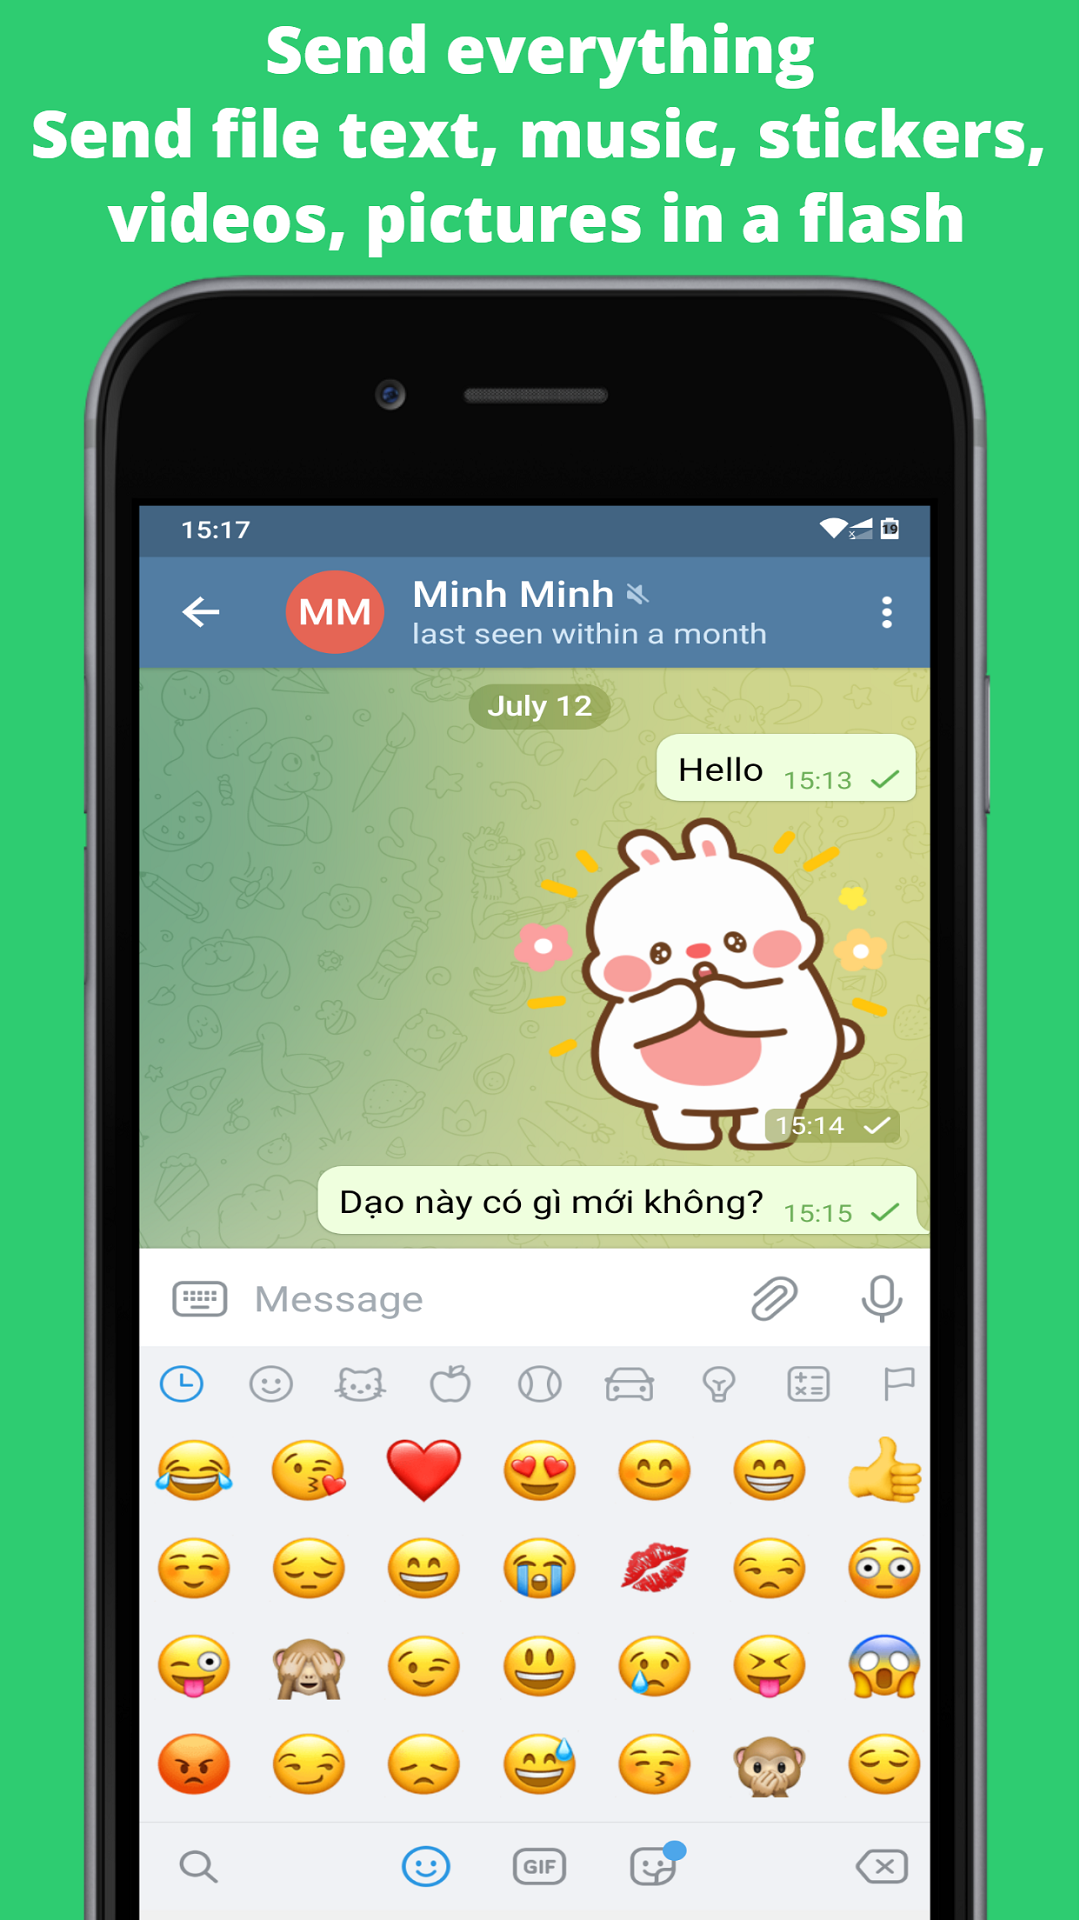 Messenger Chat & Video call